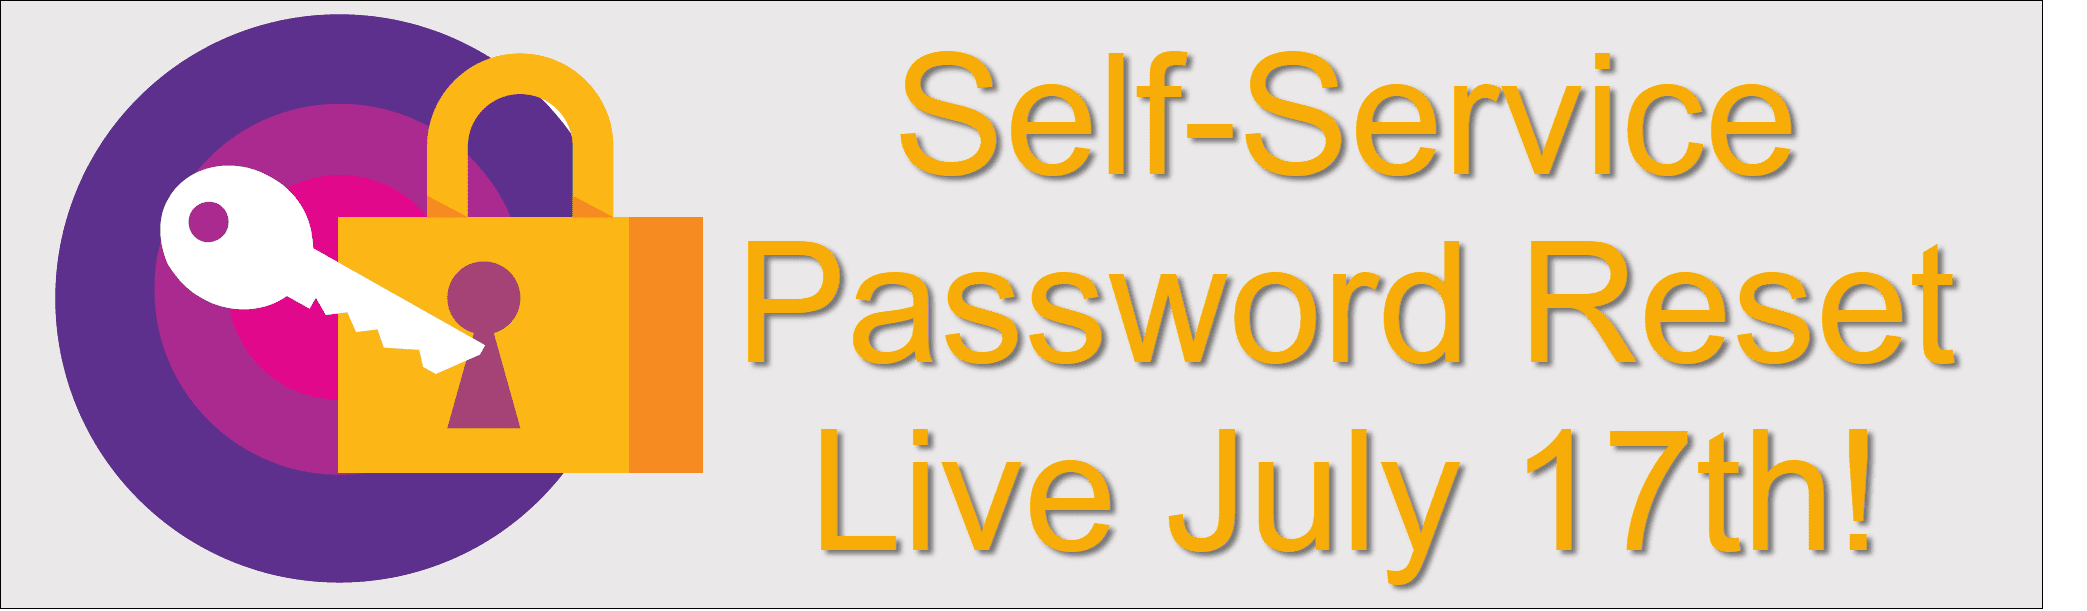 Self-Service Password Reset Live July 17th